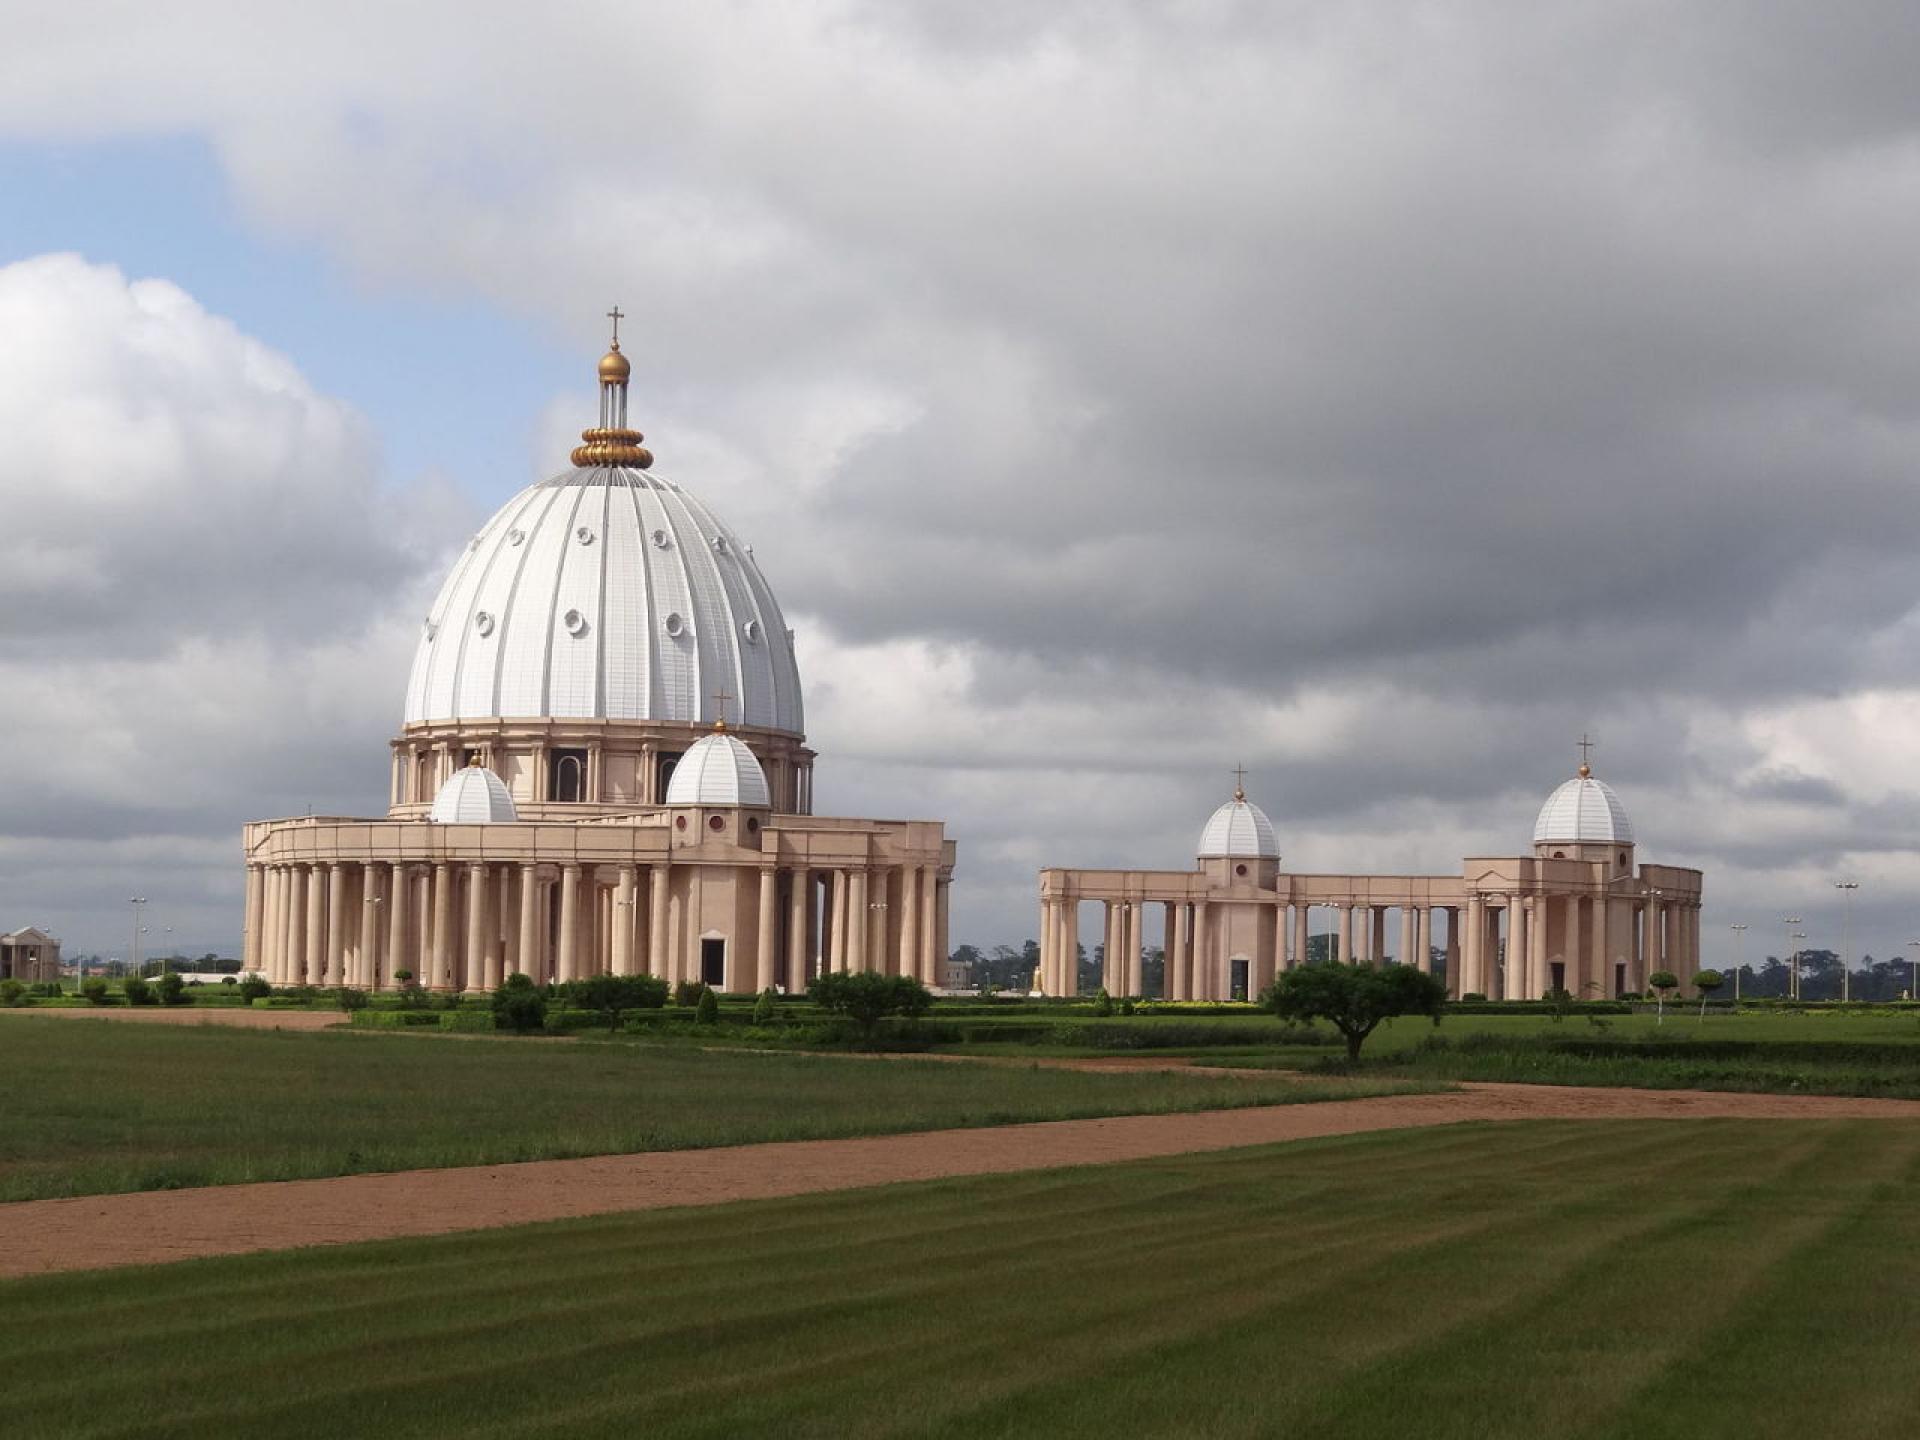 Basilica of Yamoussoukro resembles St. Peter’s in Rome. | Photo via Wikimedia